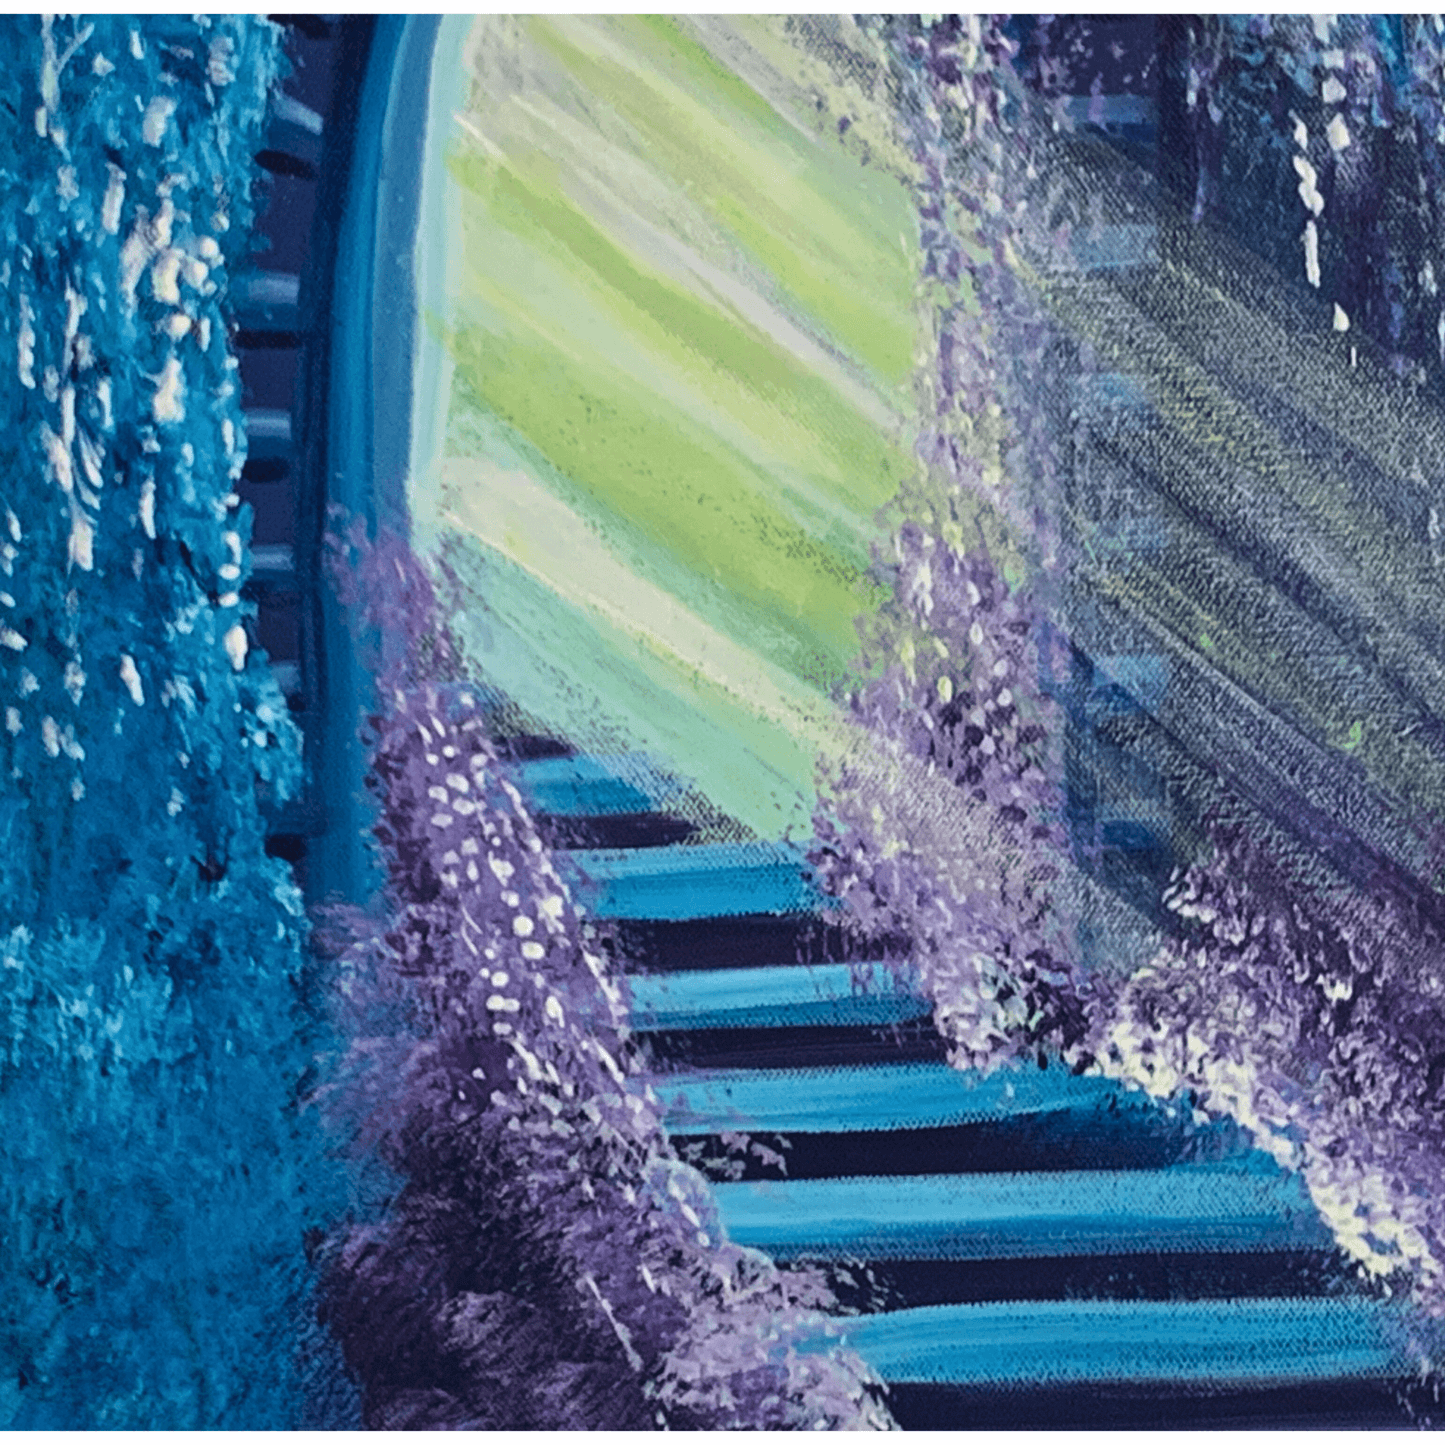 STAIRWAY TO HEAVEN- Modern Acrylic Abstract Painting on 24x36 inch Canvas